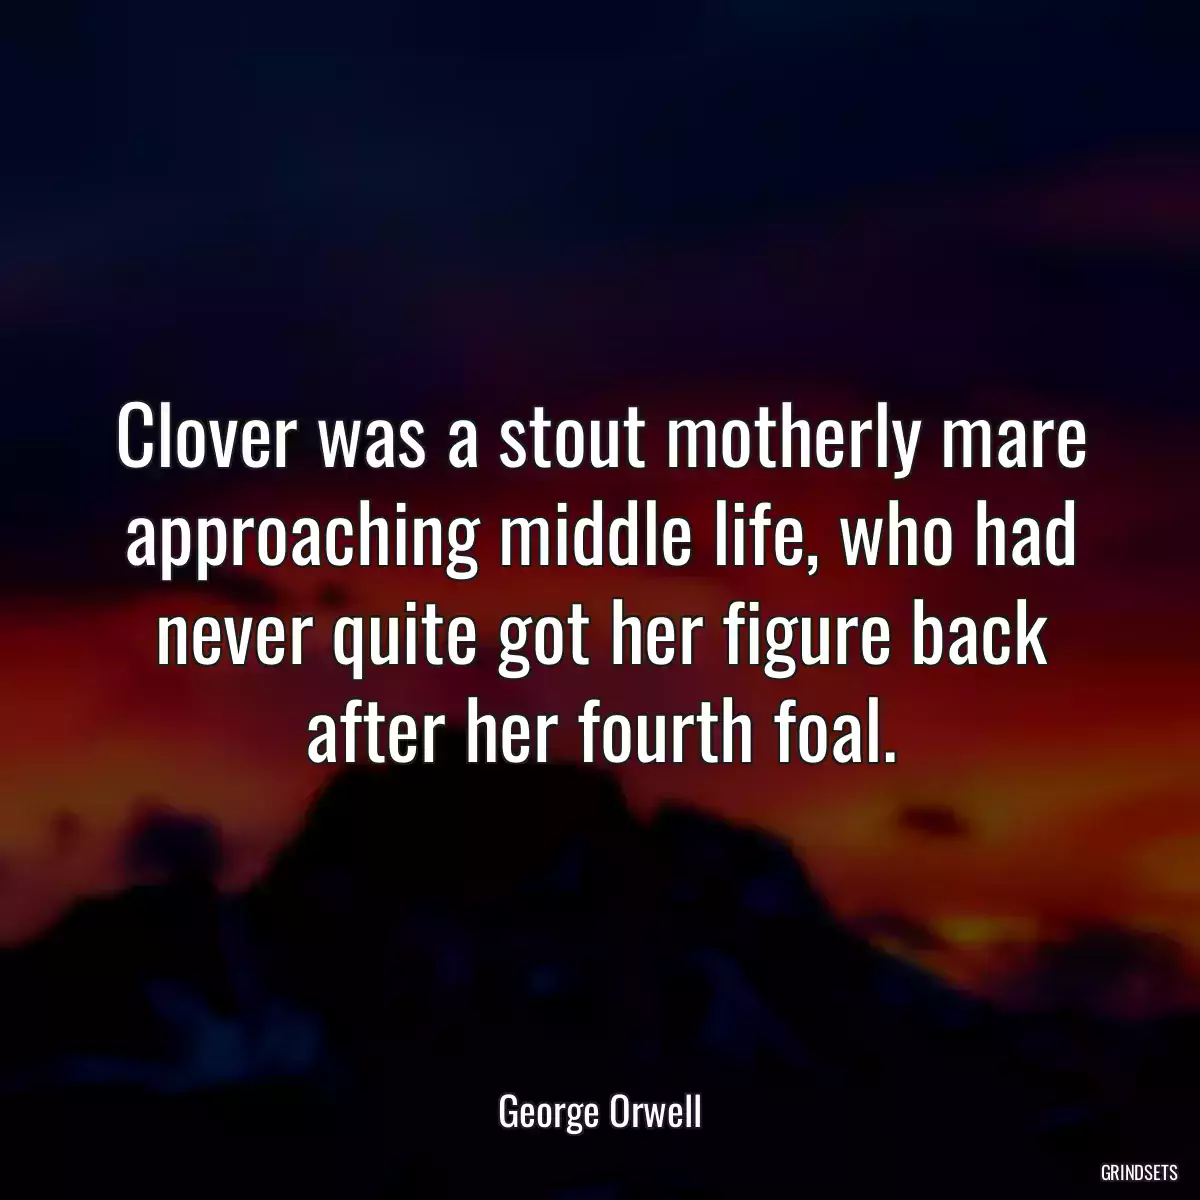 Clover was a stout motherly mare approaching middle life, who had never quite got her figure back after her fourth foal.